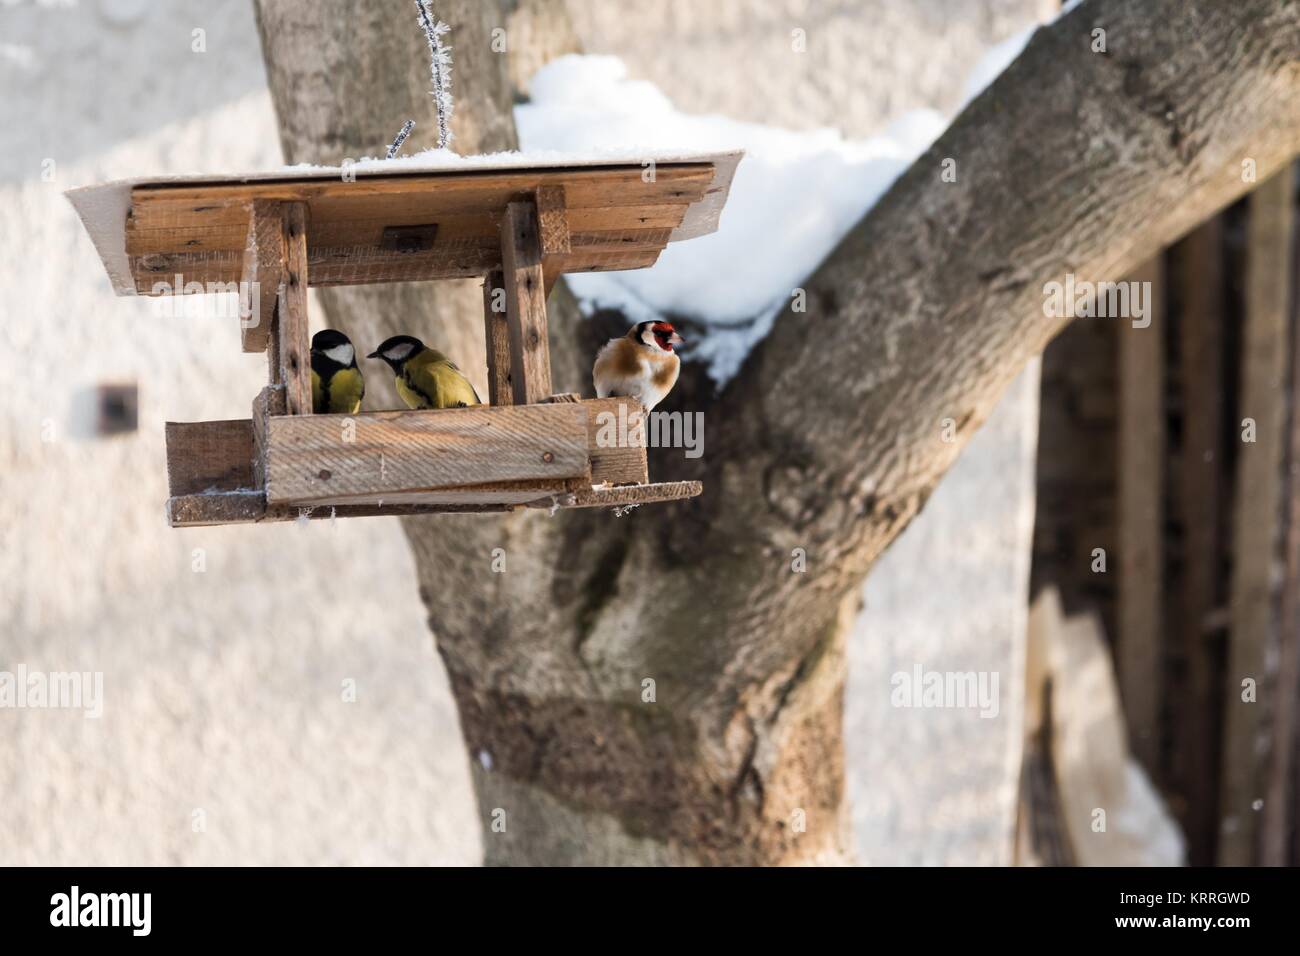 Yellow titmouse birds and goldfinch eating seed from wooden bird feeder in winter Stock Photo